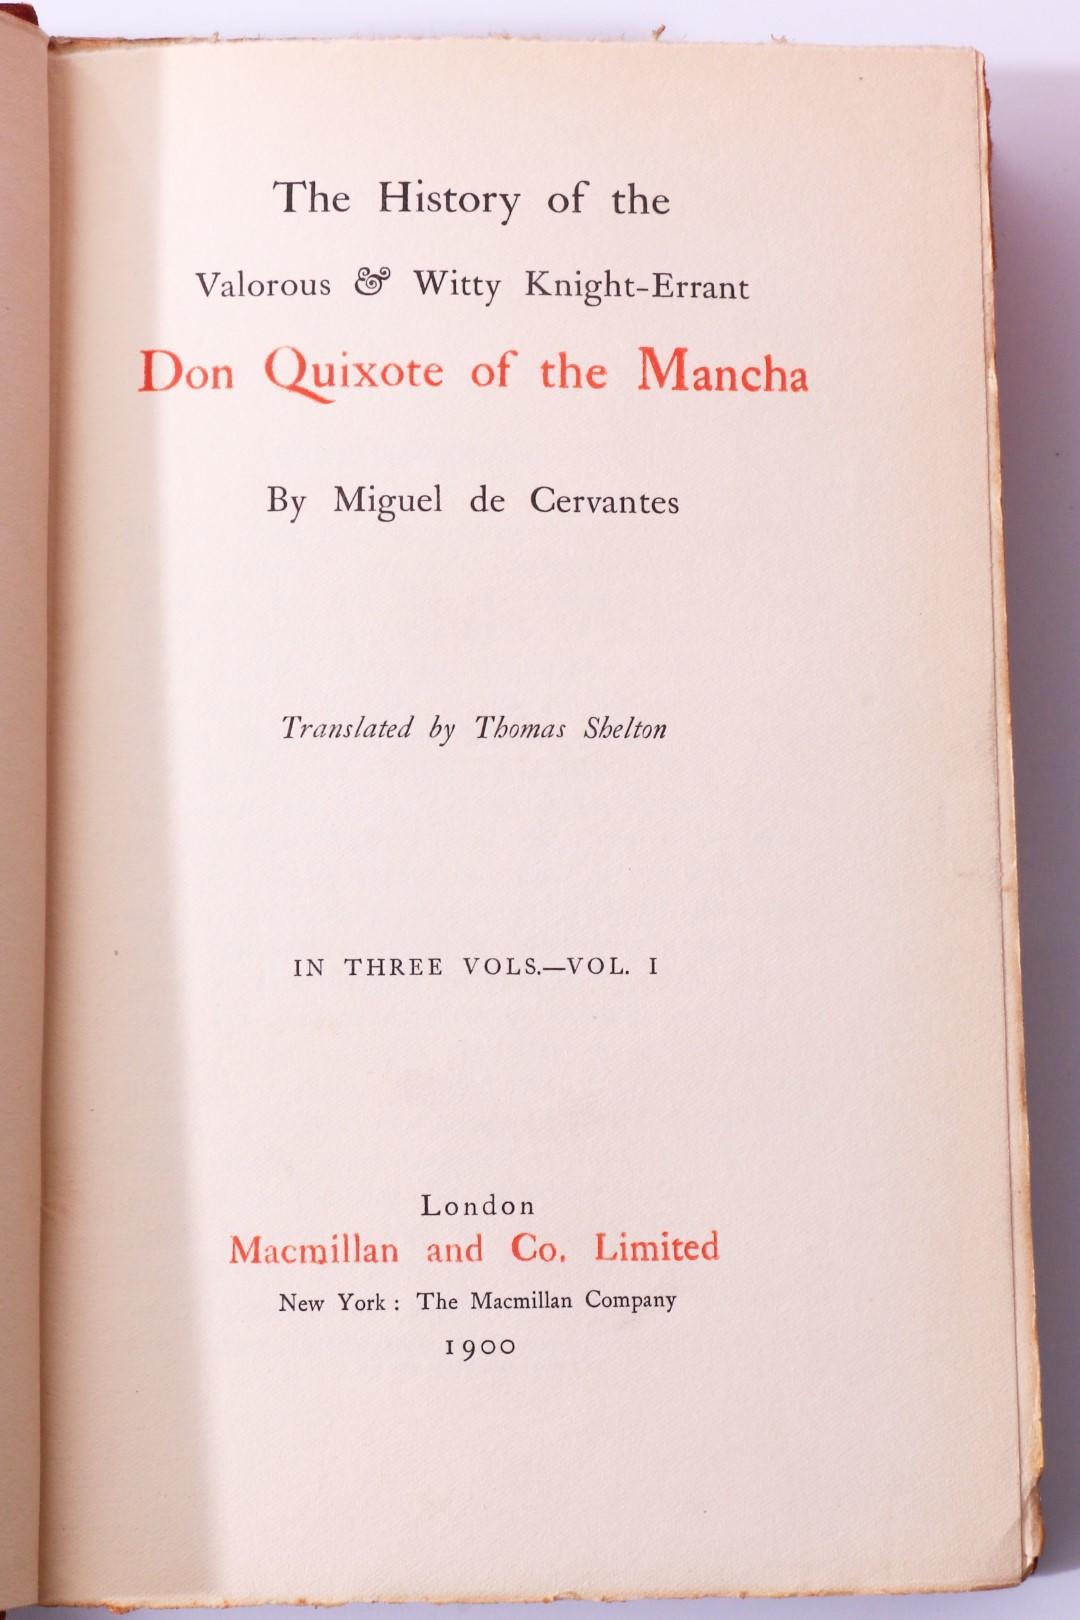 Miguel de Cervantes - The History of the Valorous and Witty Knight-Errant Don Quixote of the Mancha - Macmillan, 1900, Later Edition.